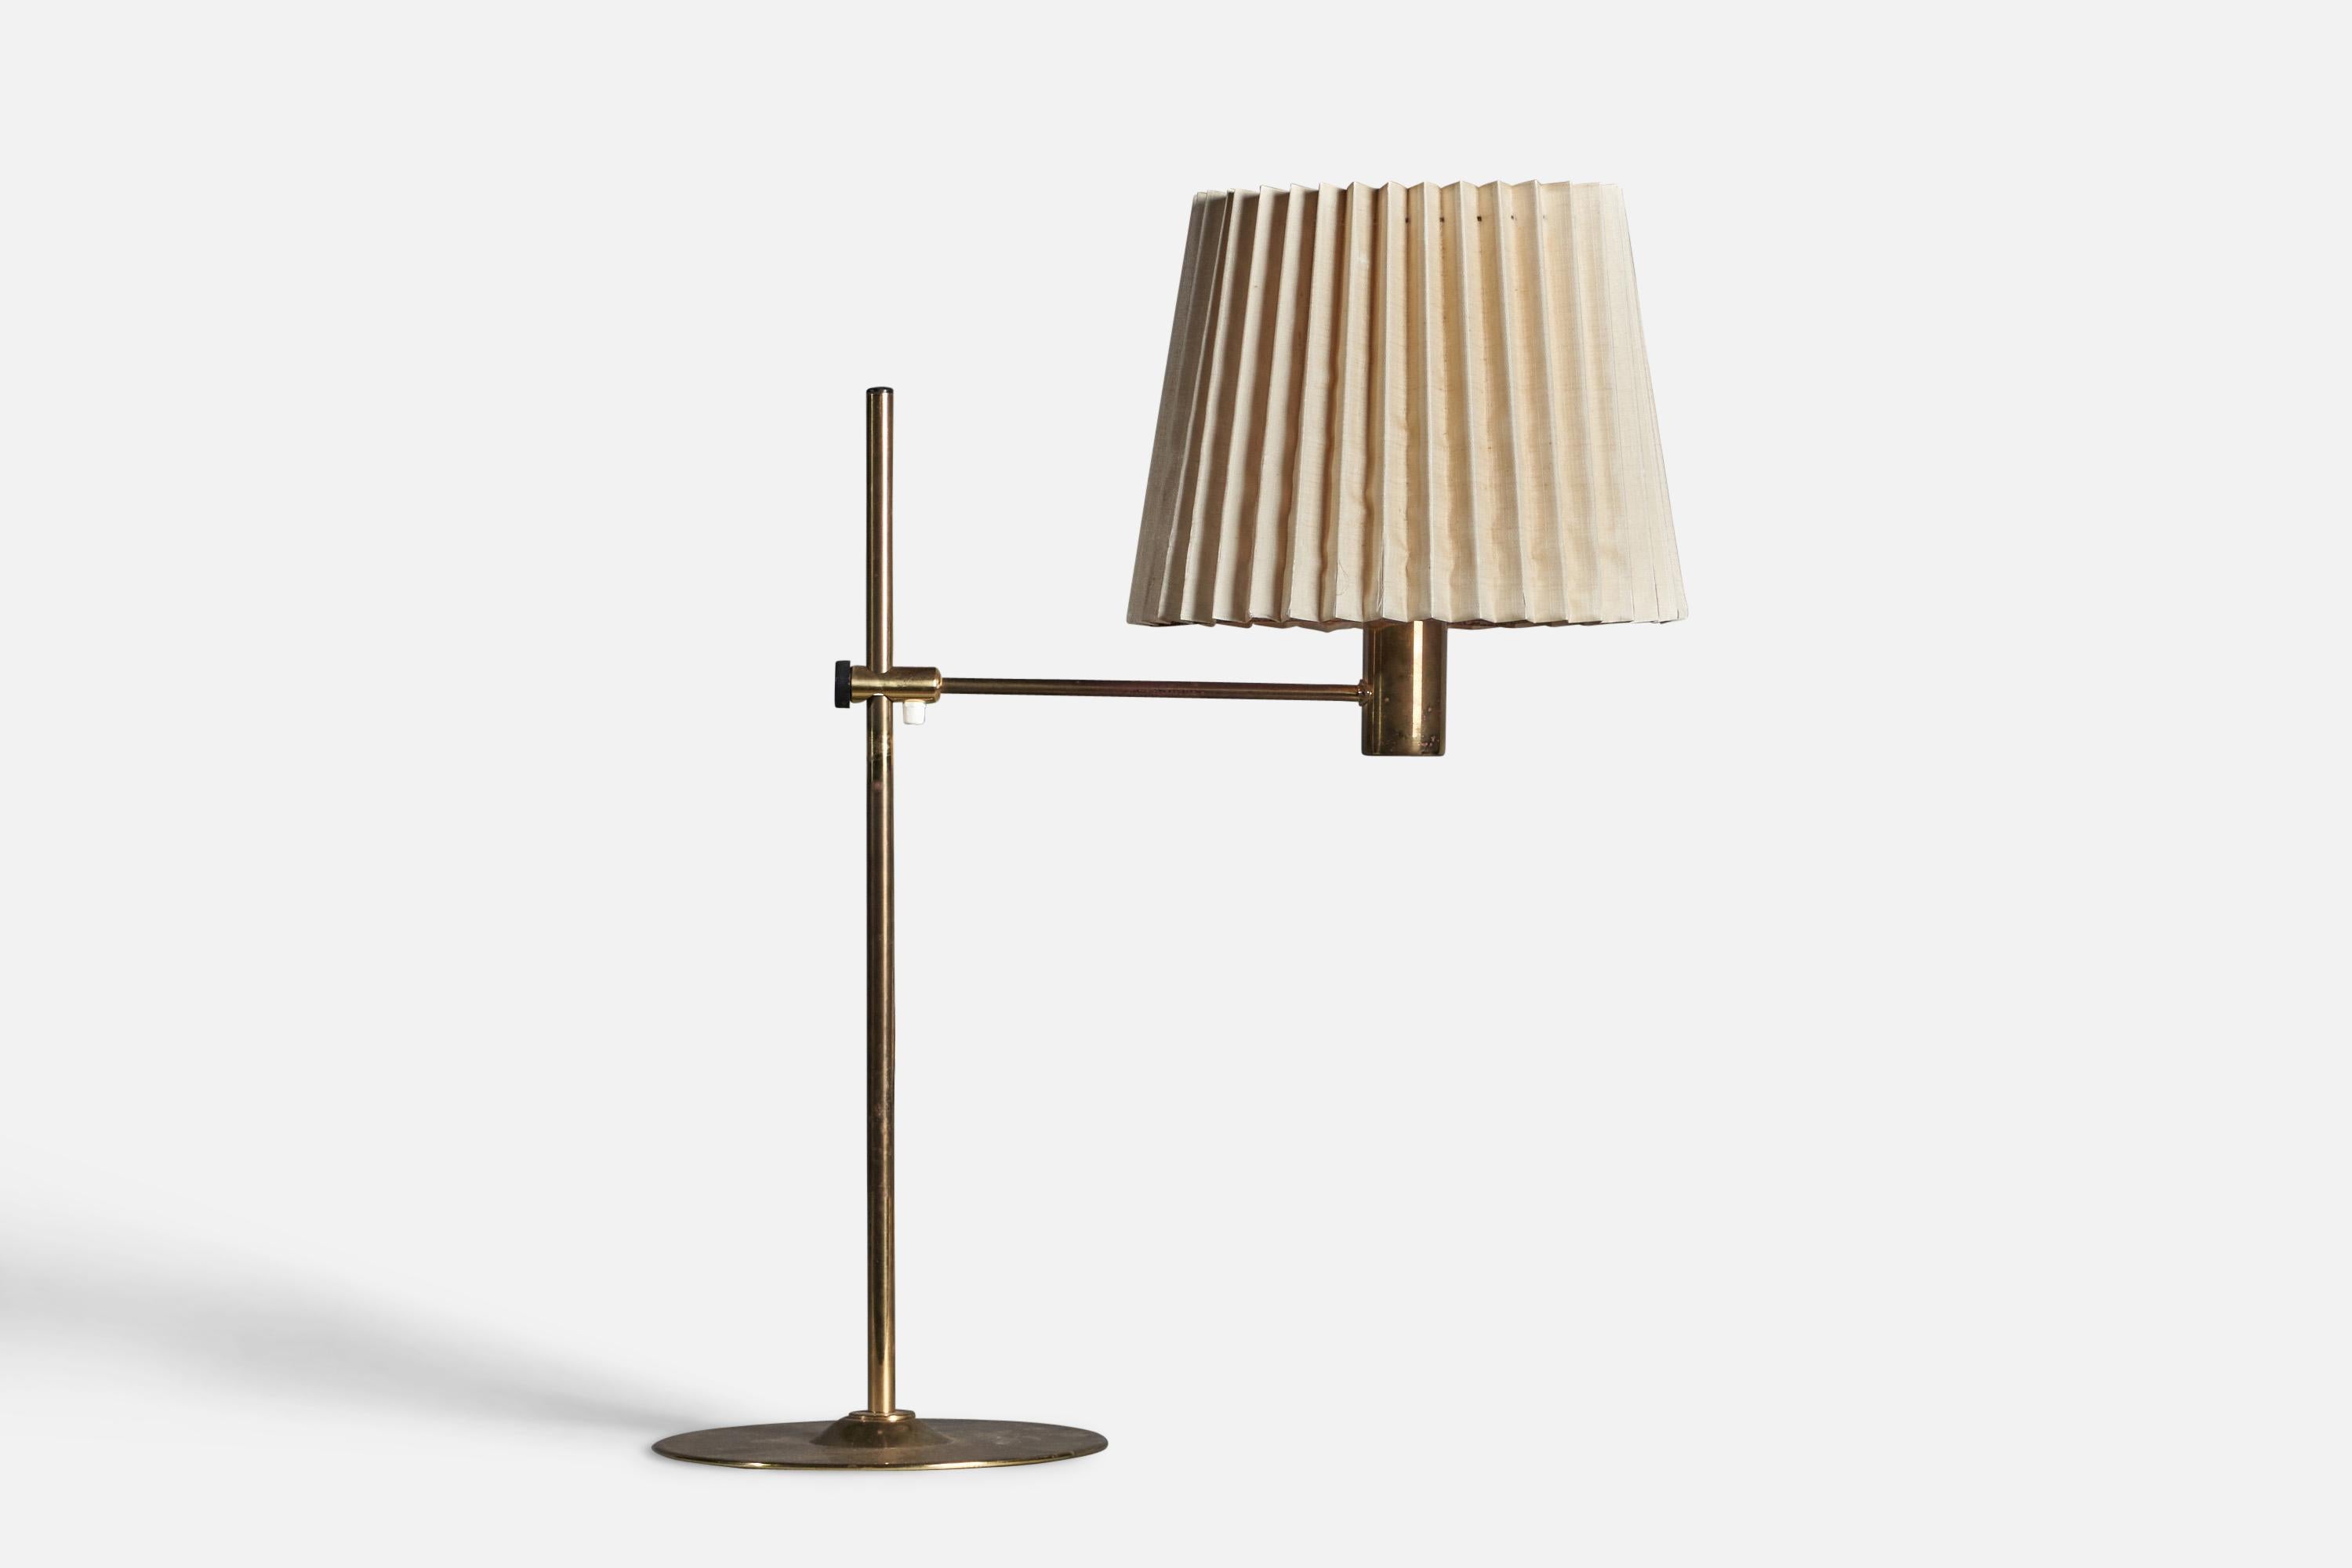 An adjustable brass and beige fabric table lamp designed and produced in Sweden, 1970s.

Overall Dimensions (inches): 28.5” x 13” W x 26” D
Bulb Specifications: E-26 Bulb
Number of Sockets: 1
Original lampshade in distressed condition, ideally